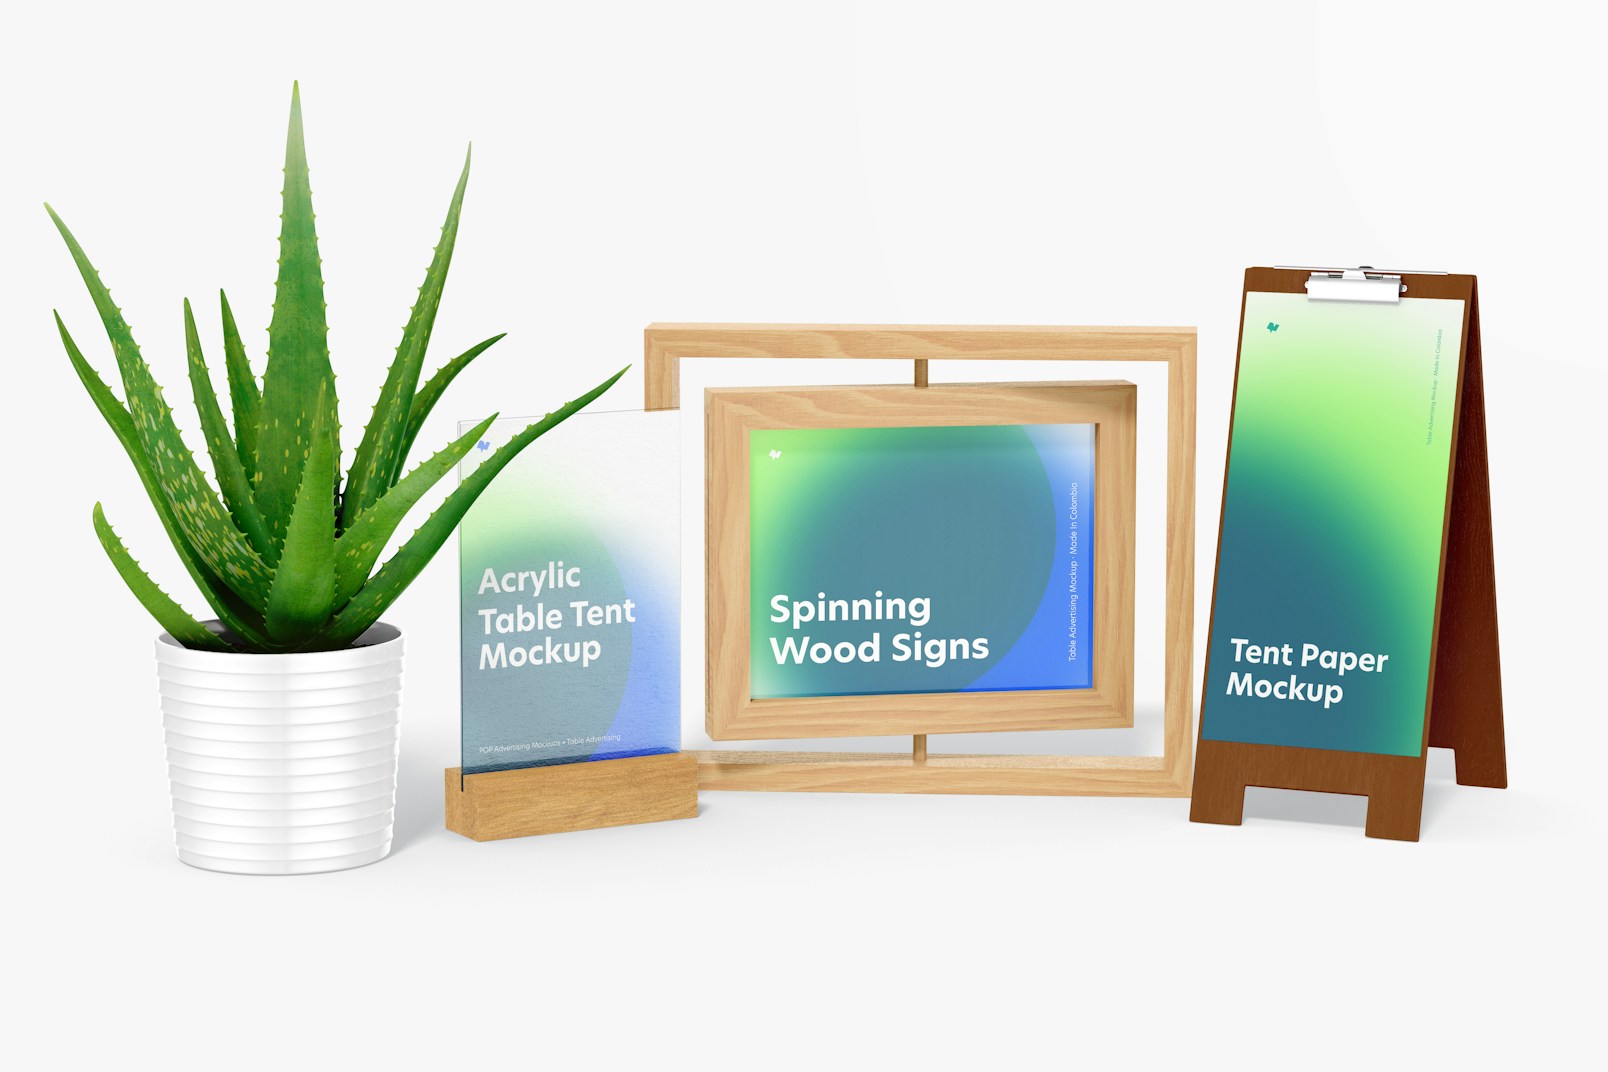 Wooden Table Tent Scene with a Plant Pot Mockup